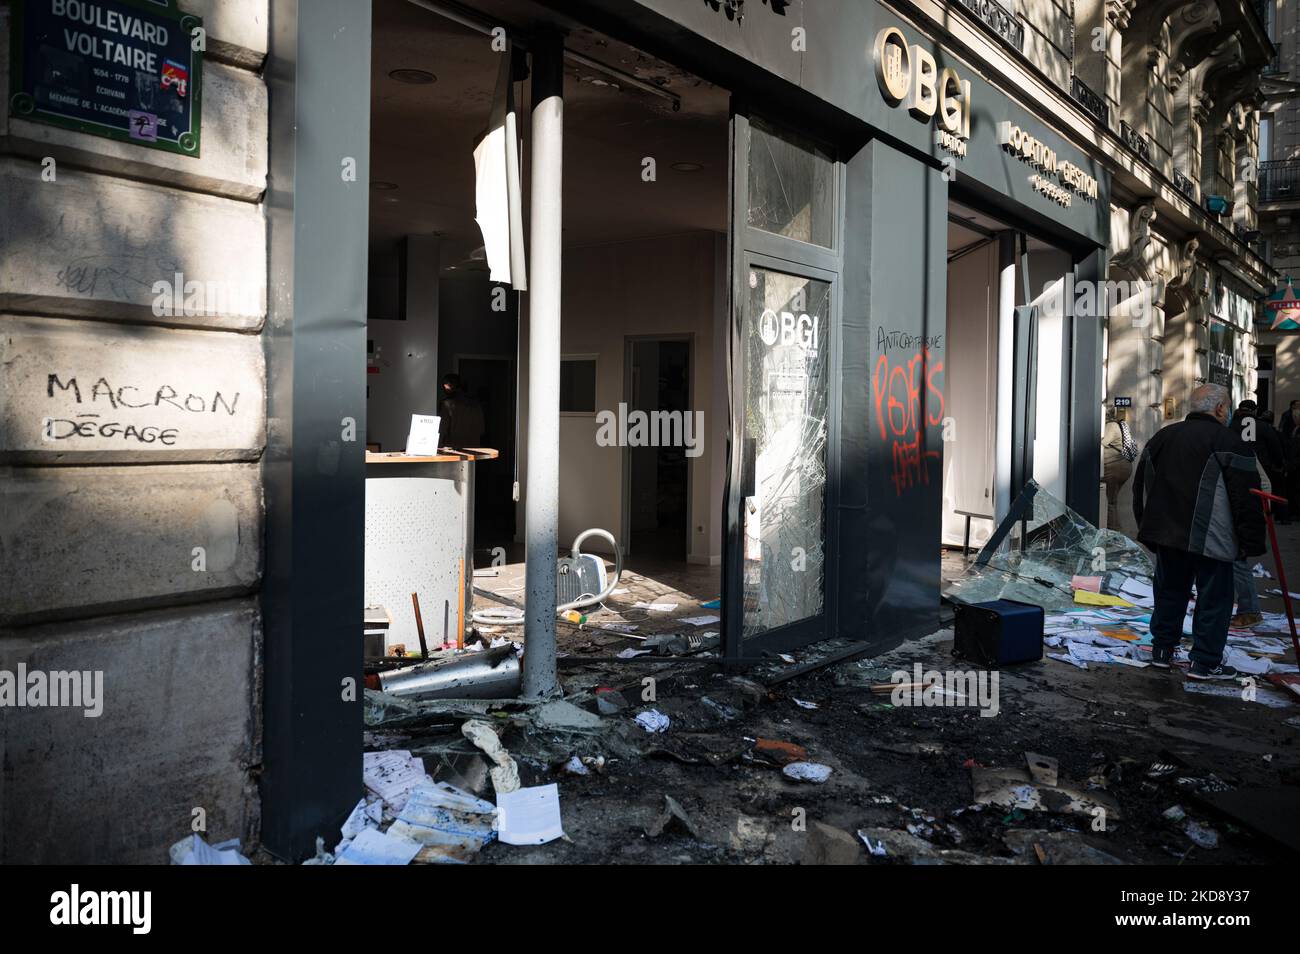 The windows of many businesses of banks, insurance companies and real estate agencies were destroyed by black blocks during the traditional May Day demonstration in Paris (Labor Day) marking the International Workers Day, starting from the Place de la République in Paris, May 1, 2022. (Photo by Samuel Boivin/NurPhoto) Stock Photo